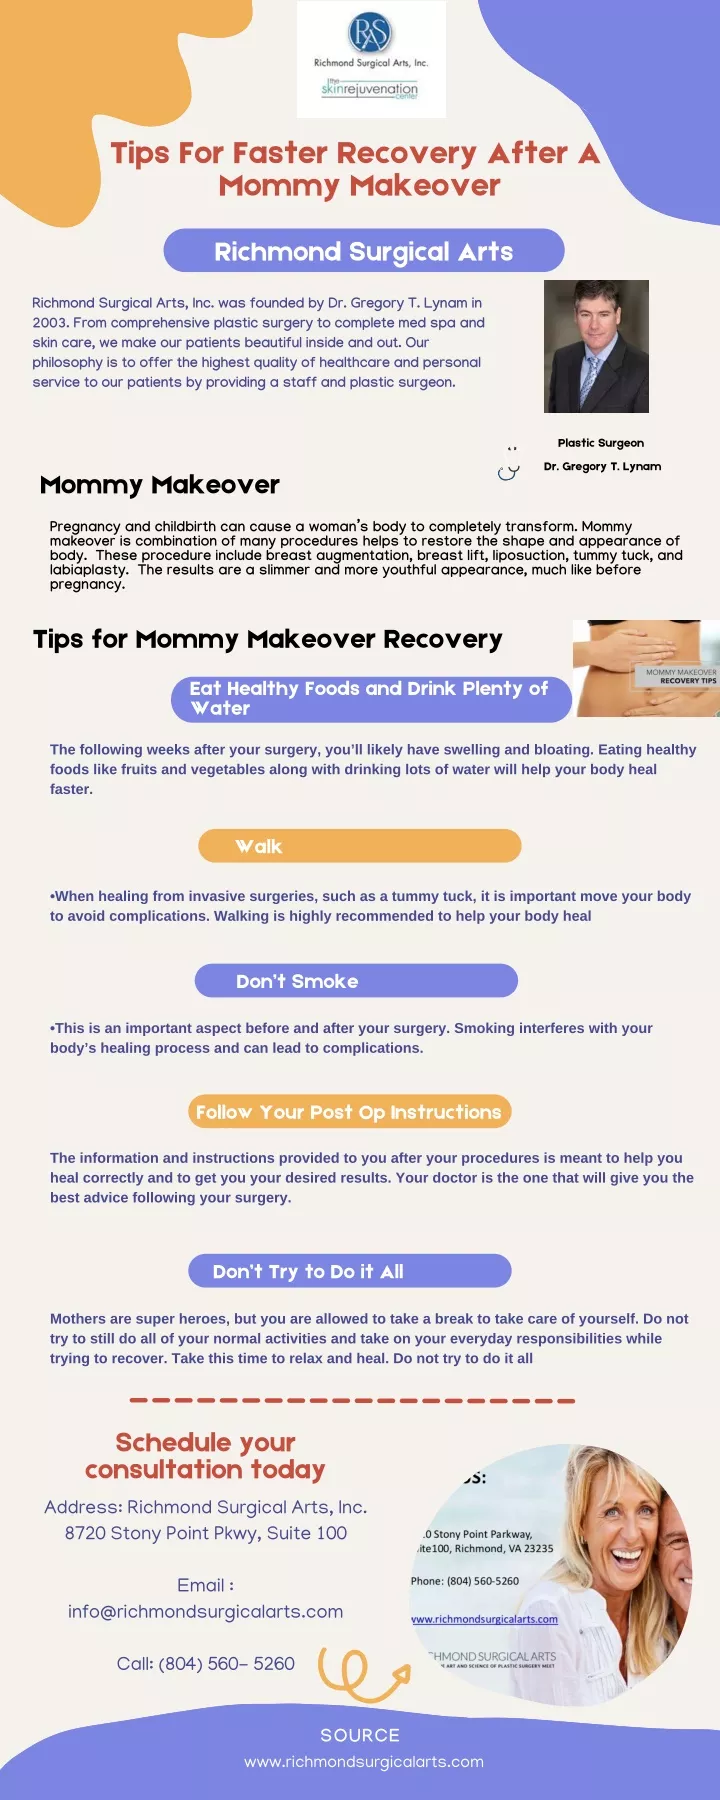 tips for faster recovery after a mommy makeover